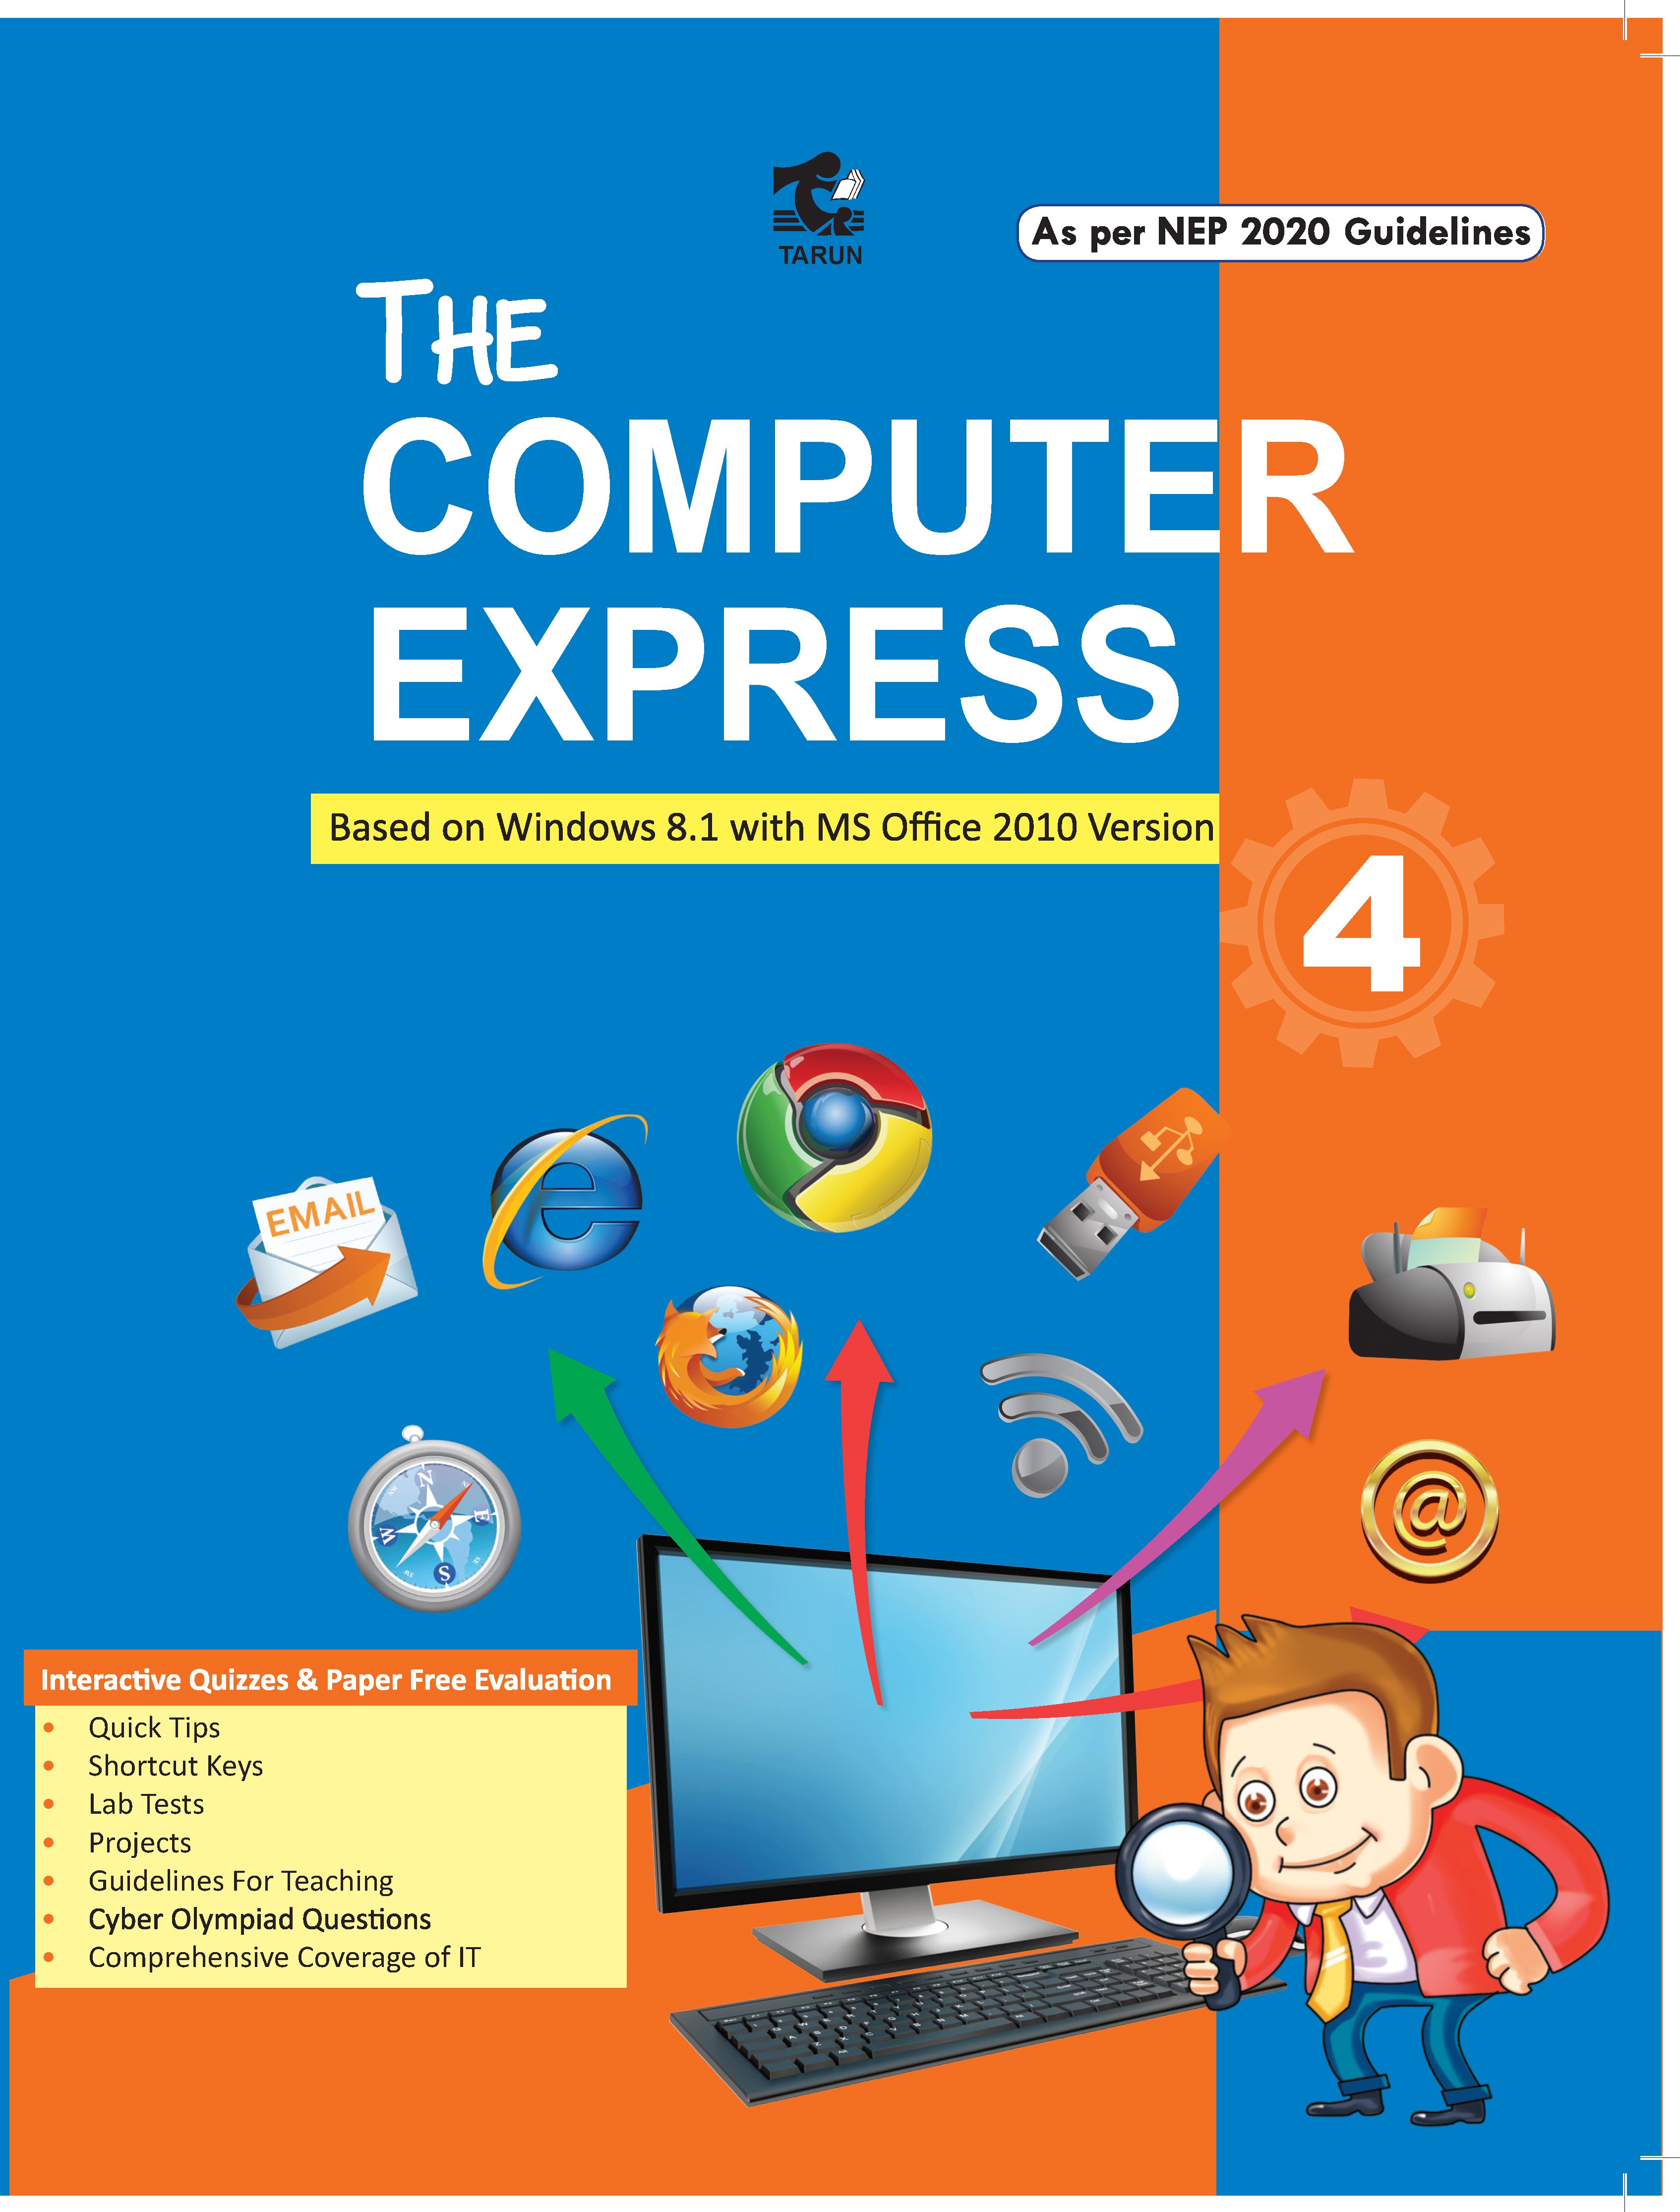 THE COMPUTER EXPRESS 4